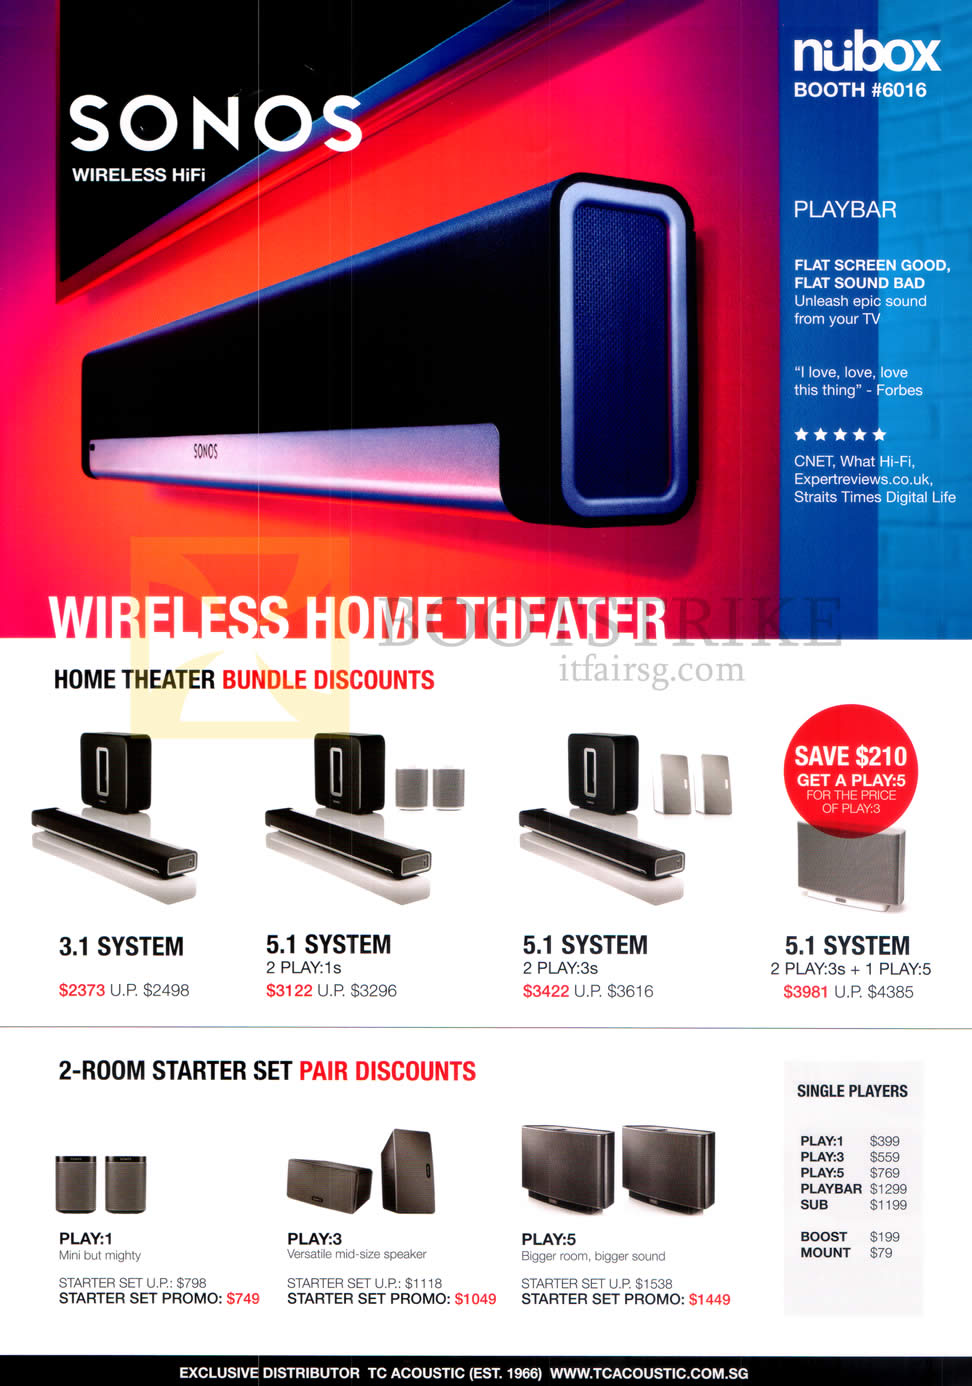 PC SHOW 2015 price list image brochure of Nubox Sonos Home Theatre 3.1 System, 5.1, Play